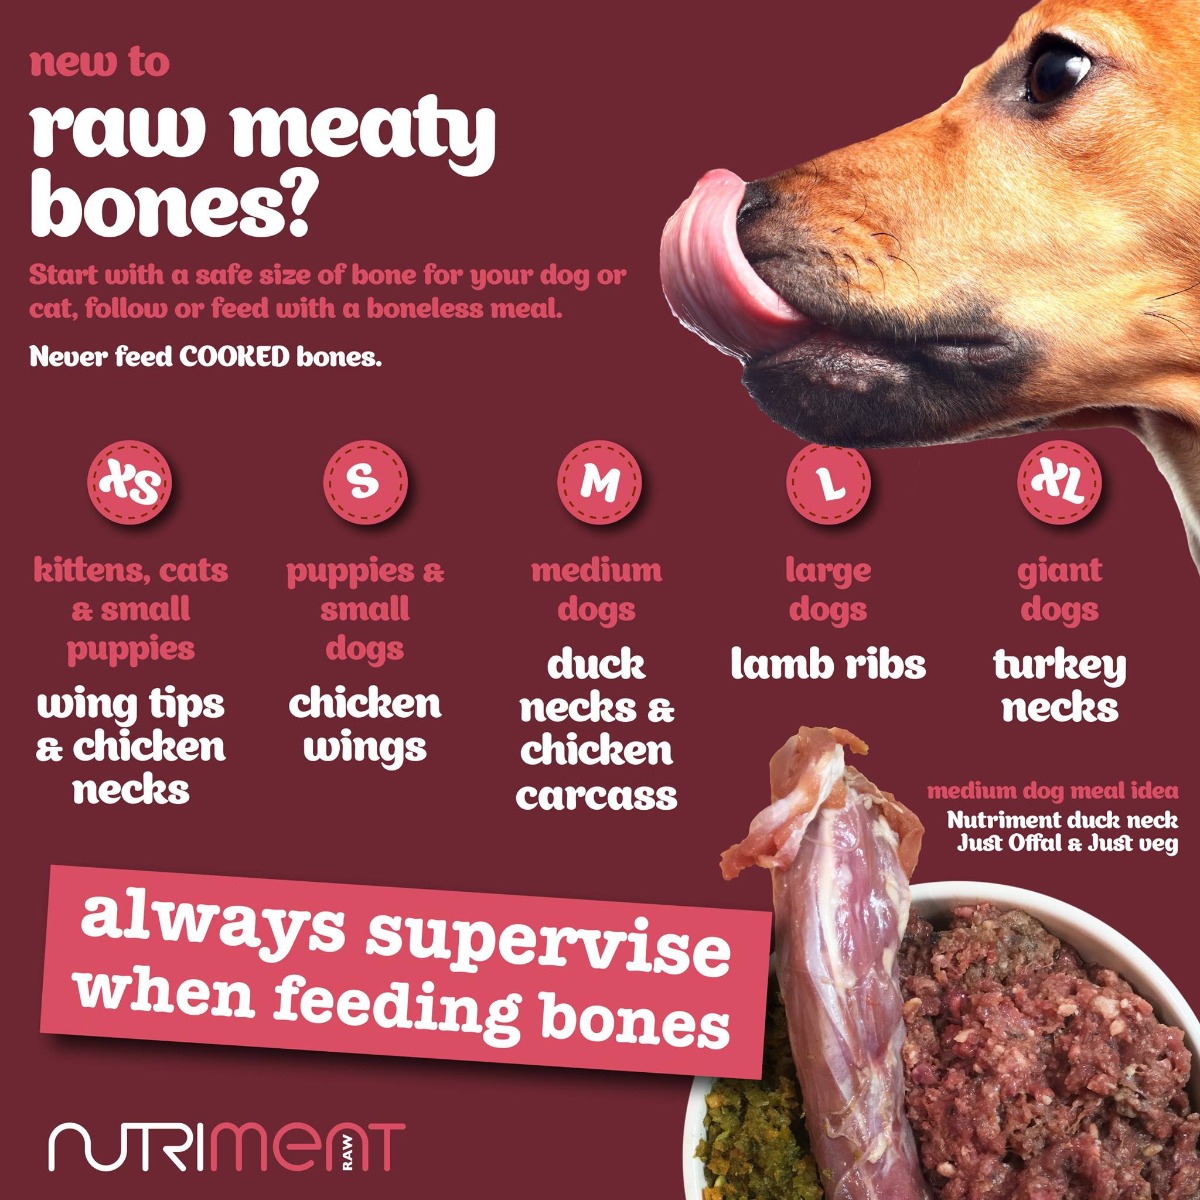 can i give raw meat to my dog